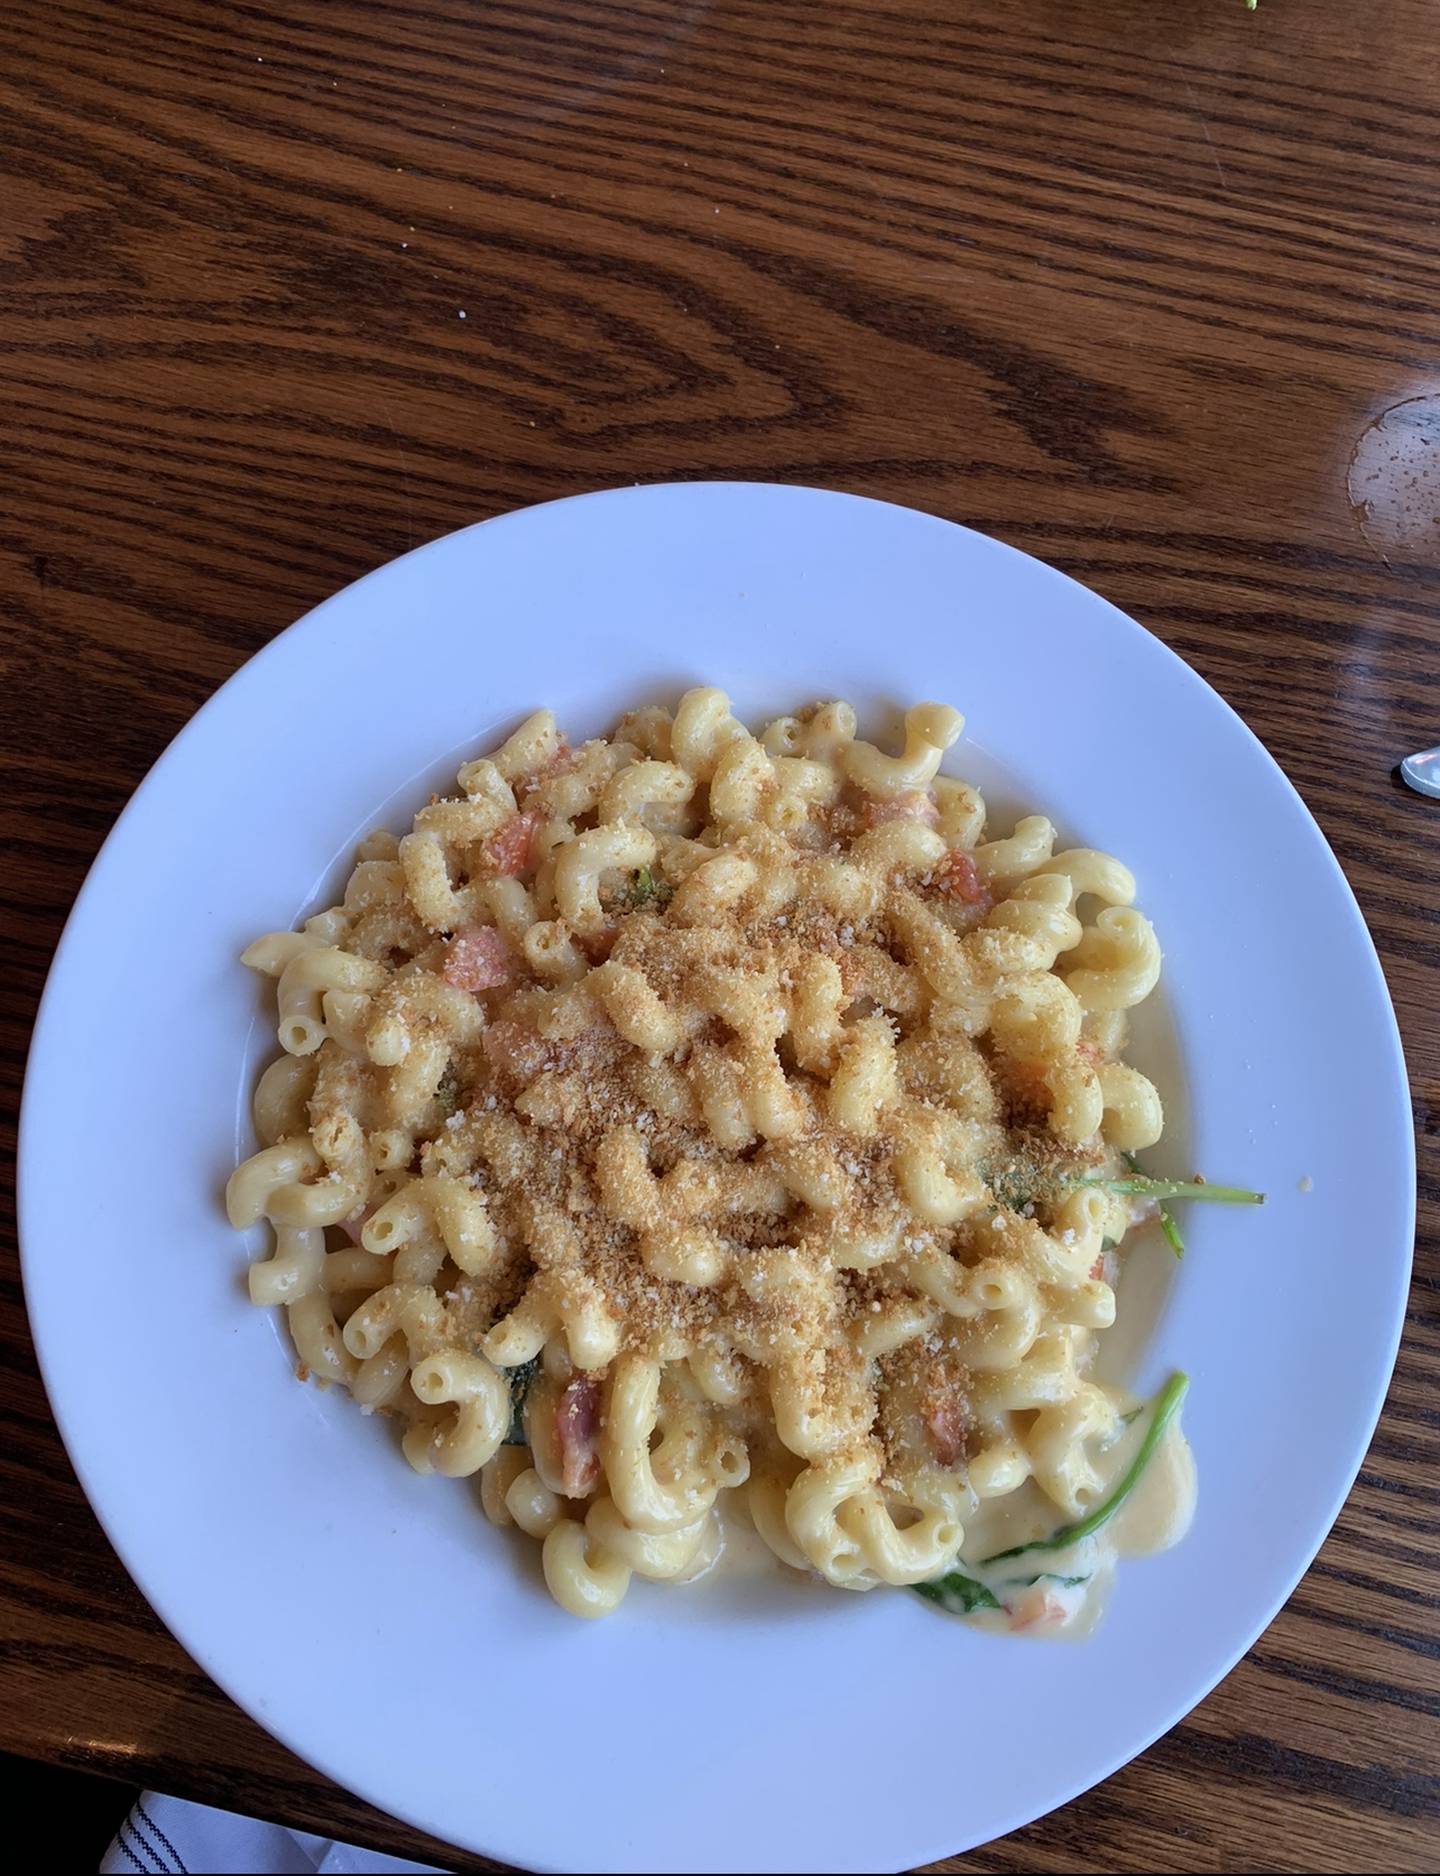 "NOT Your Mom's Mac & Cheese" lives up to its name, as it's an entree unto itself. Topped with several cheeses, bacon and breadcrumbs, this pasta dish is filling and delightful.